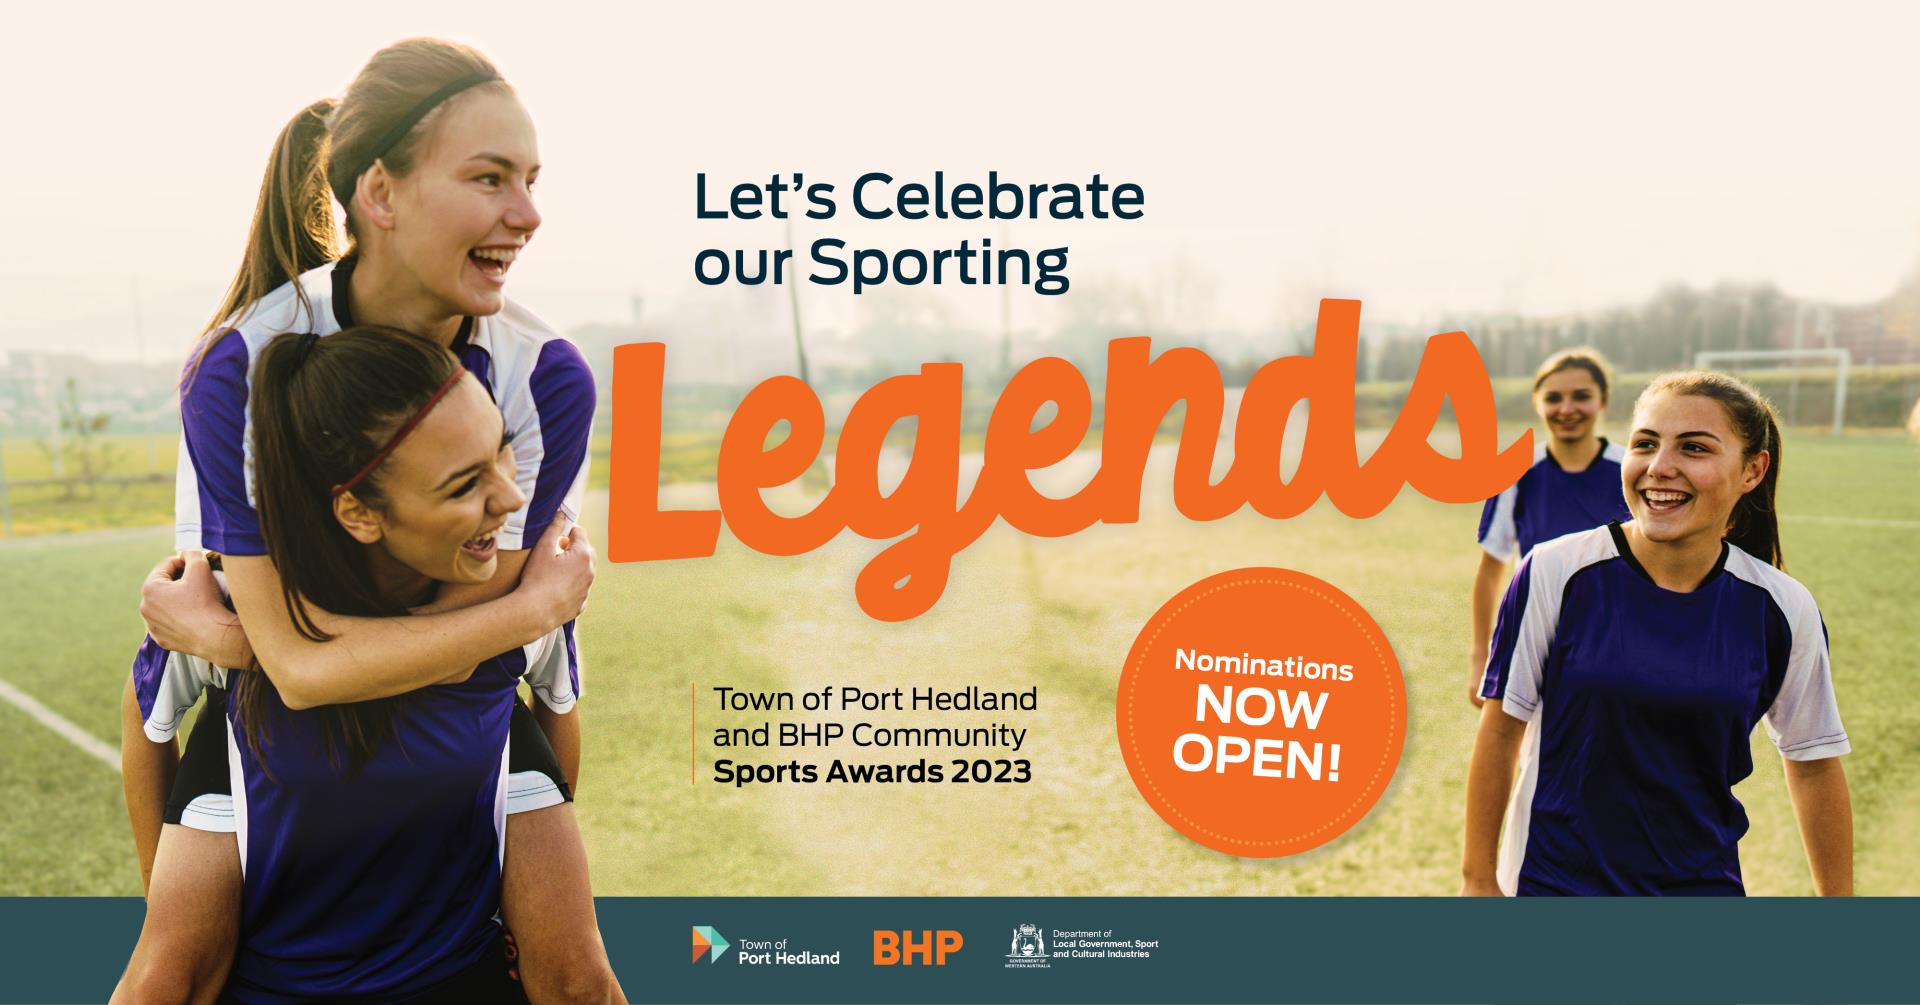 Nominations open for the 2023 Town of Port Hedland and BHP Community Sports Awards